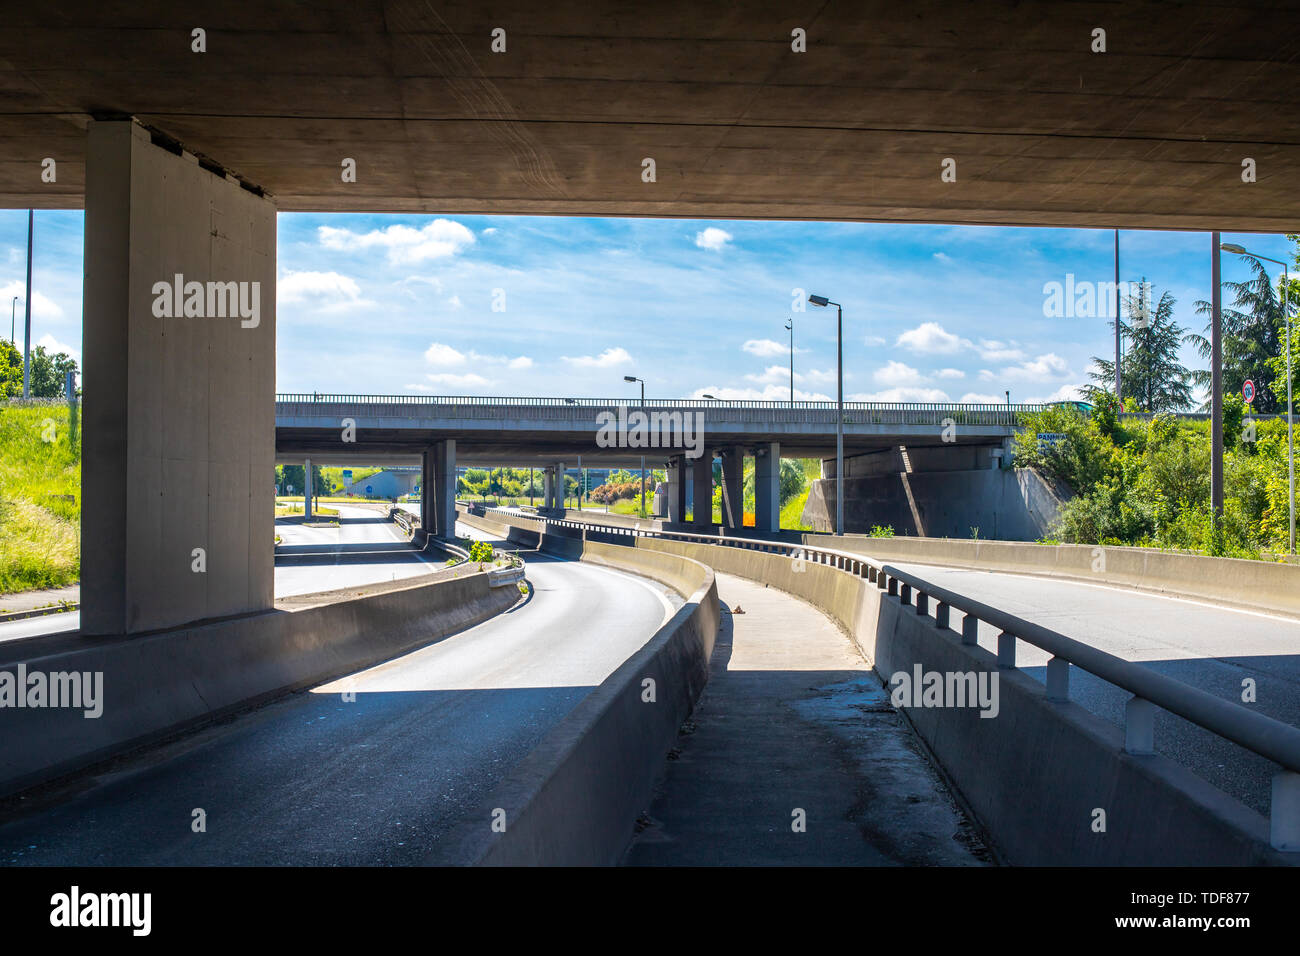 Under the bridge on the motorway. Concrete construction of road junction. Highway in Europe. Between two highways. No cars on highway. Stock Photo